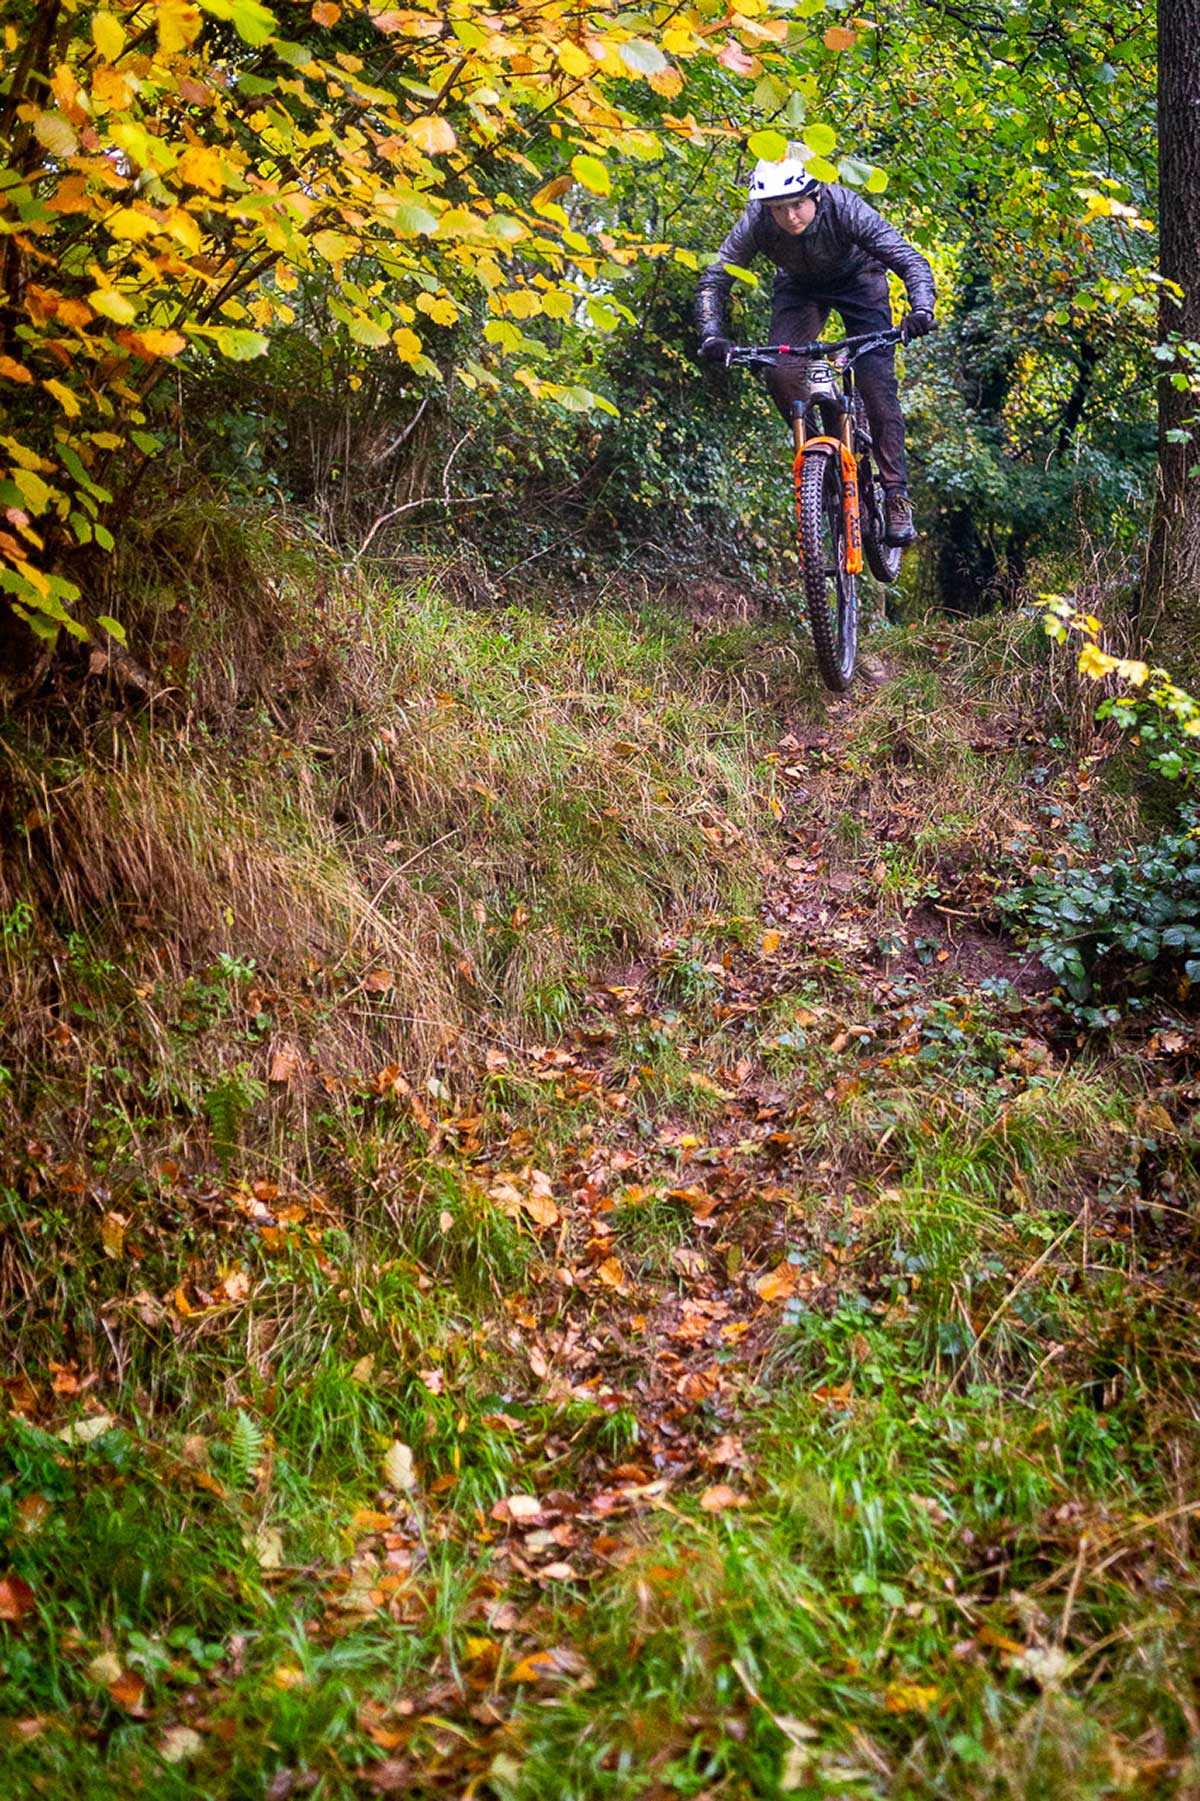 freeride line at black mountains cycle centre photo credit james hudson rider jessie-may morgan testing fox float 38 factory fork